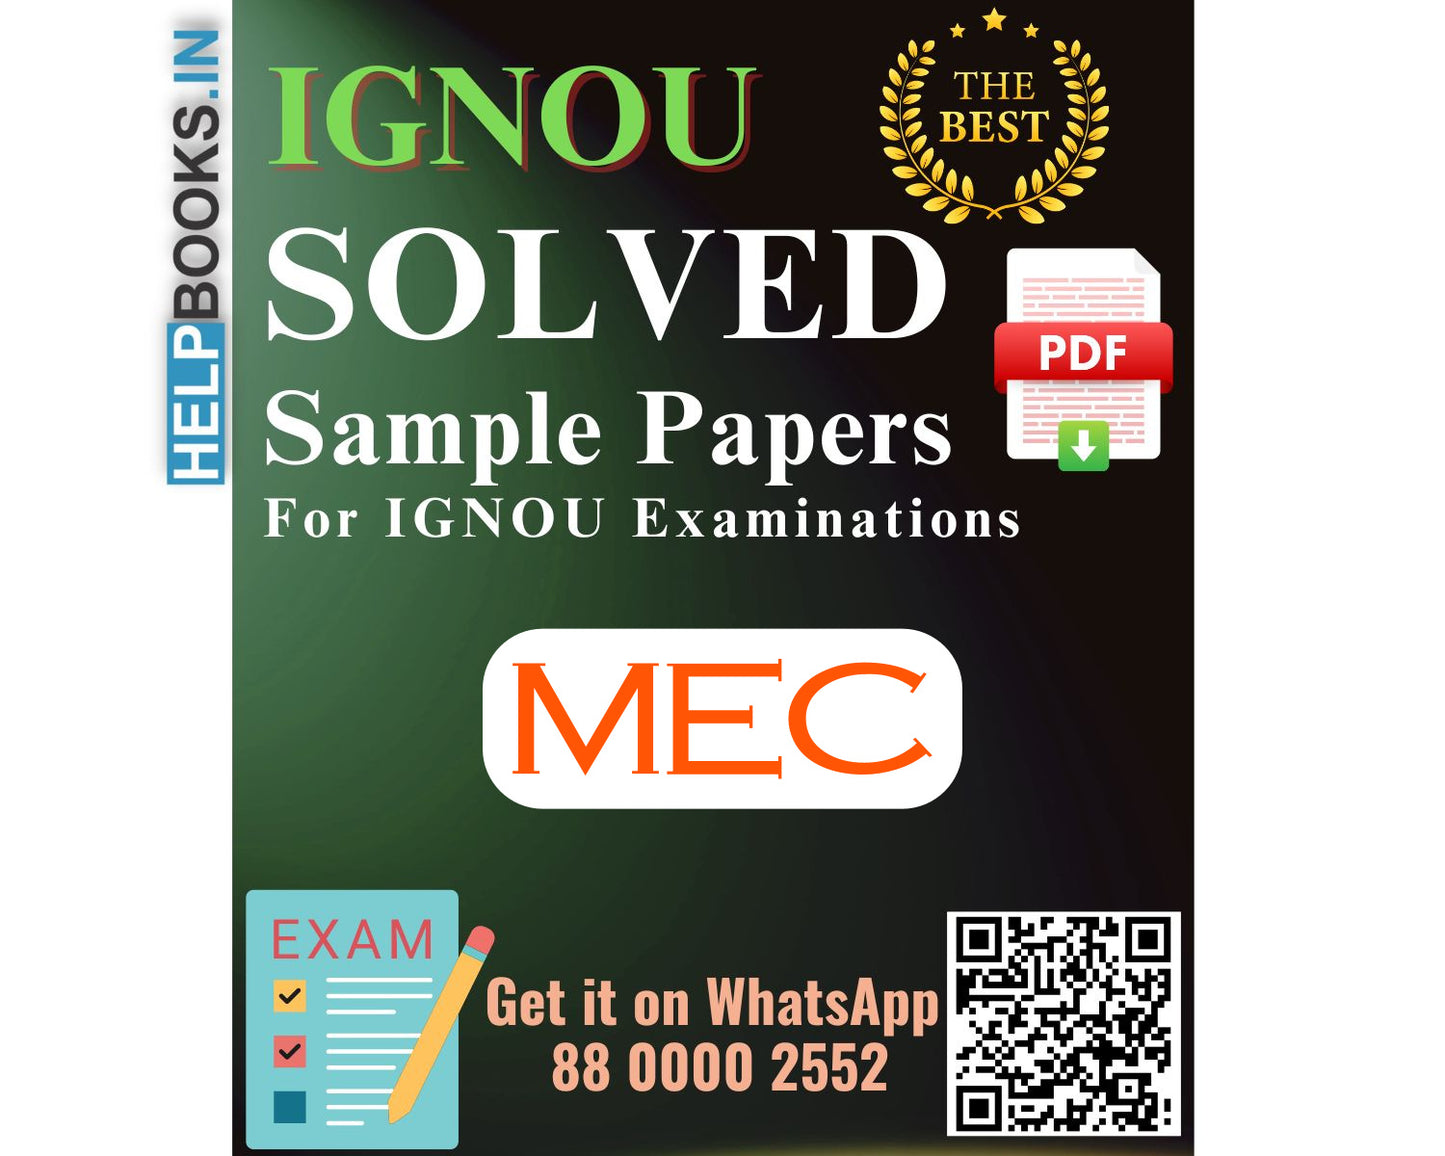 IGNOU Master of Arts (Economics) (MEC) | Solved Sample Papers for Exams